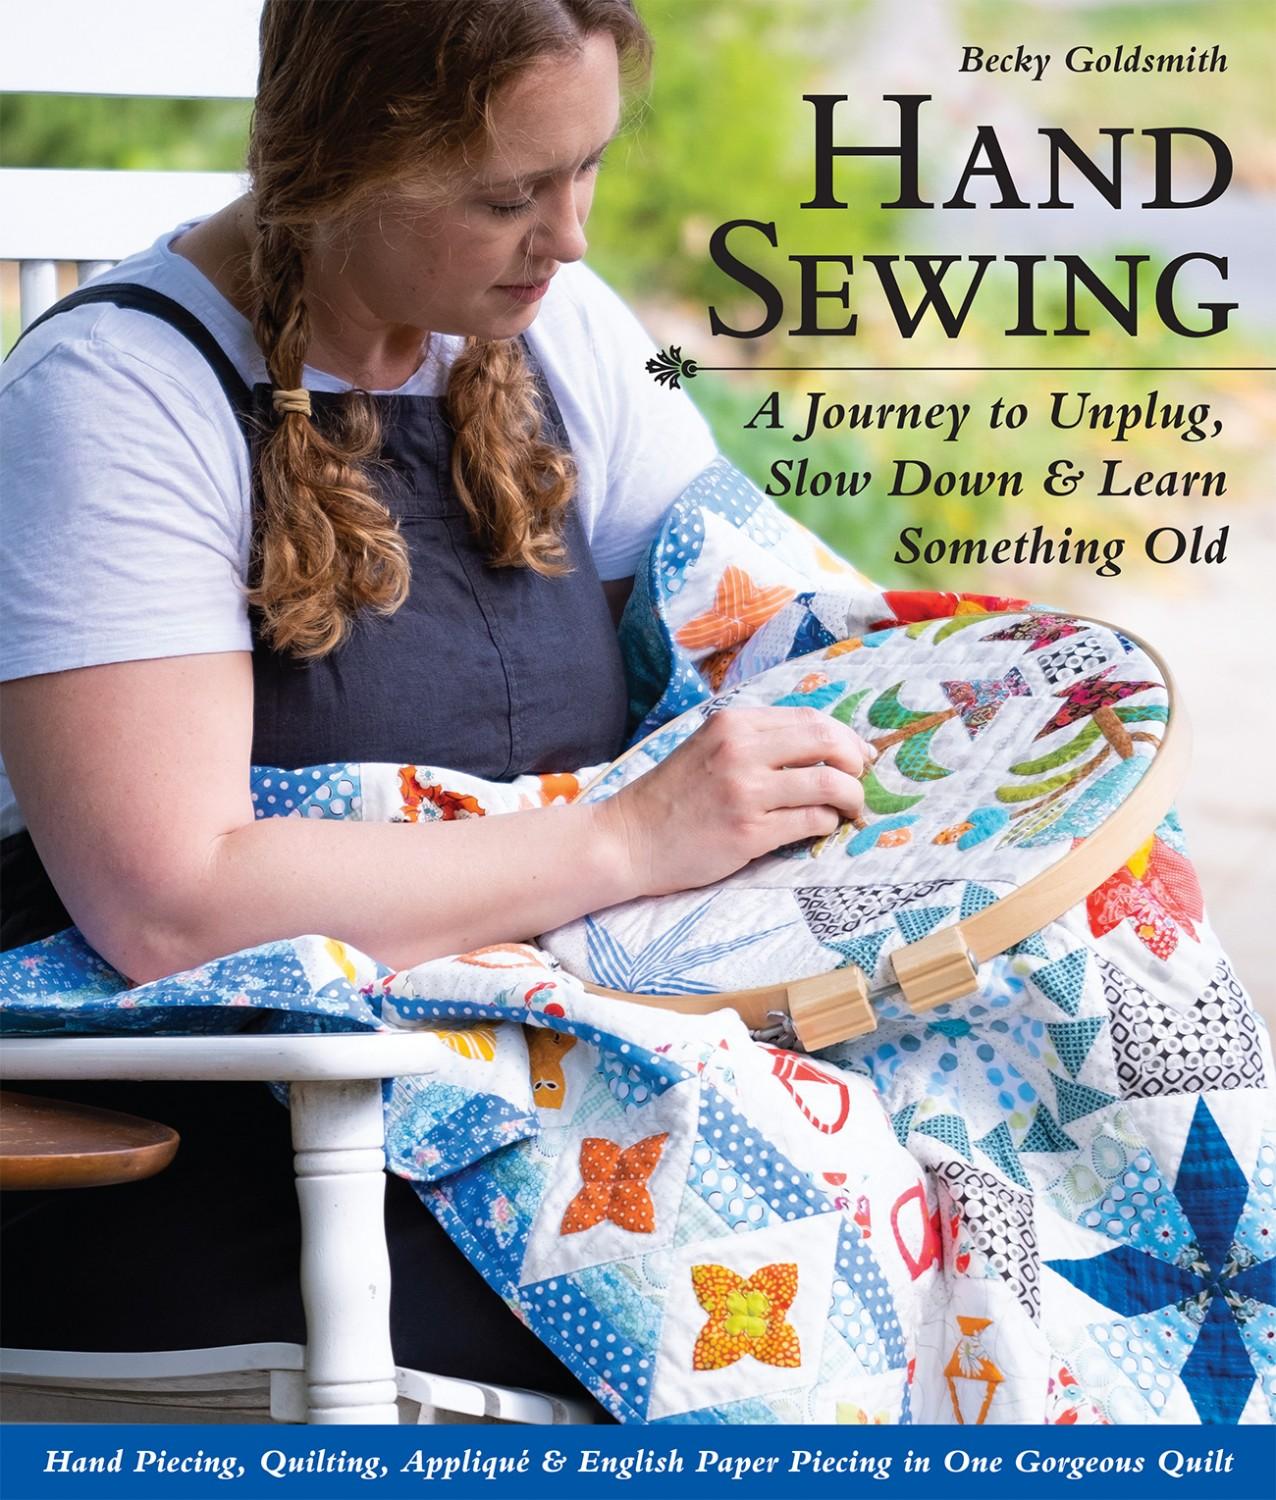 Hand Sewing A Journey to Unplug, Slow Down & Learn Something Old